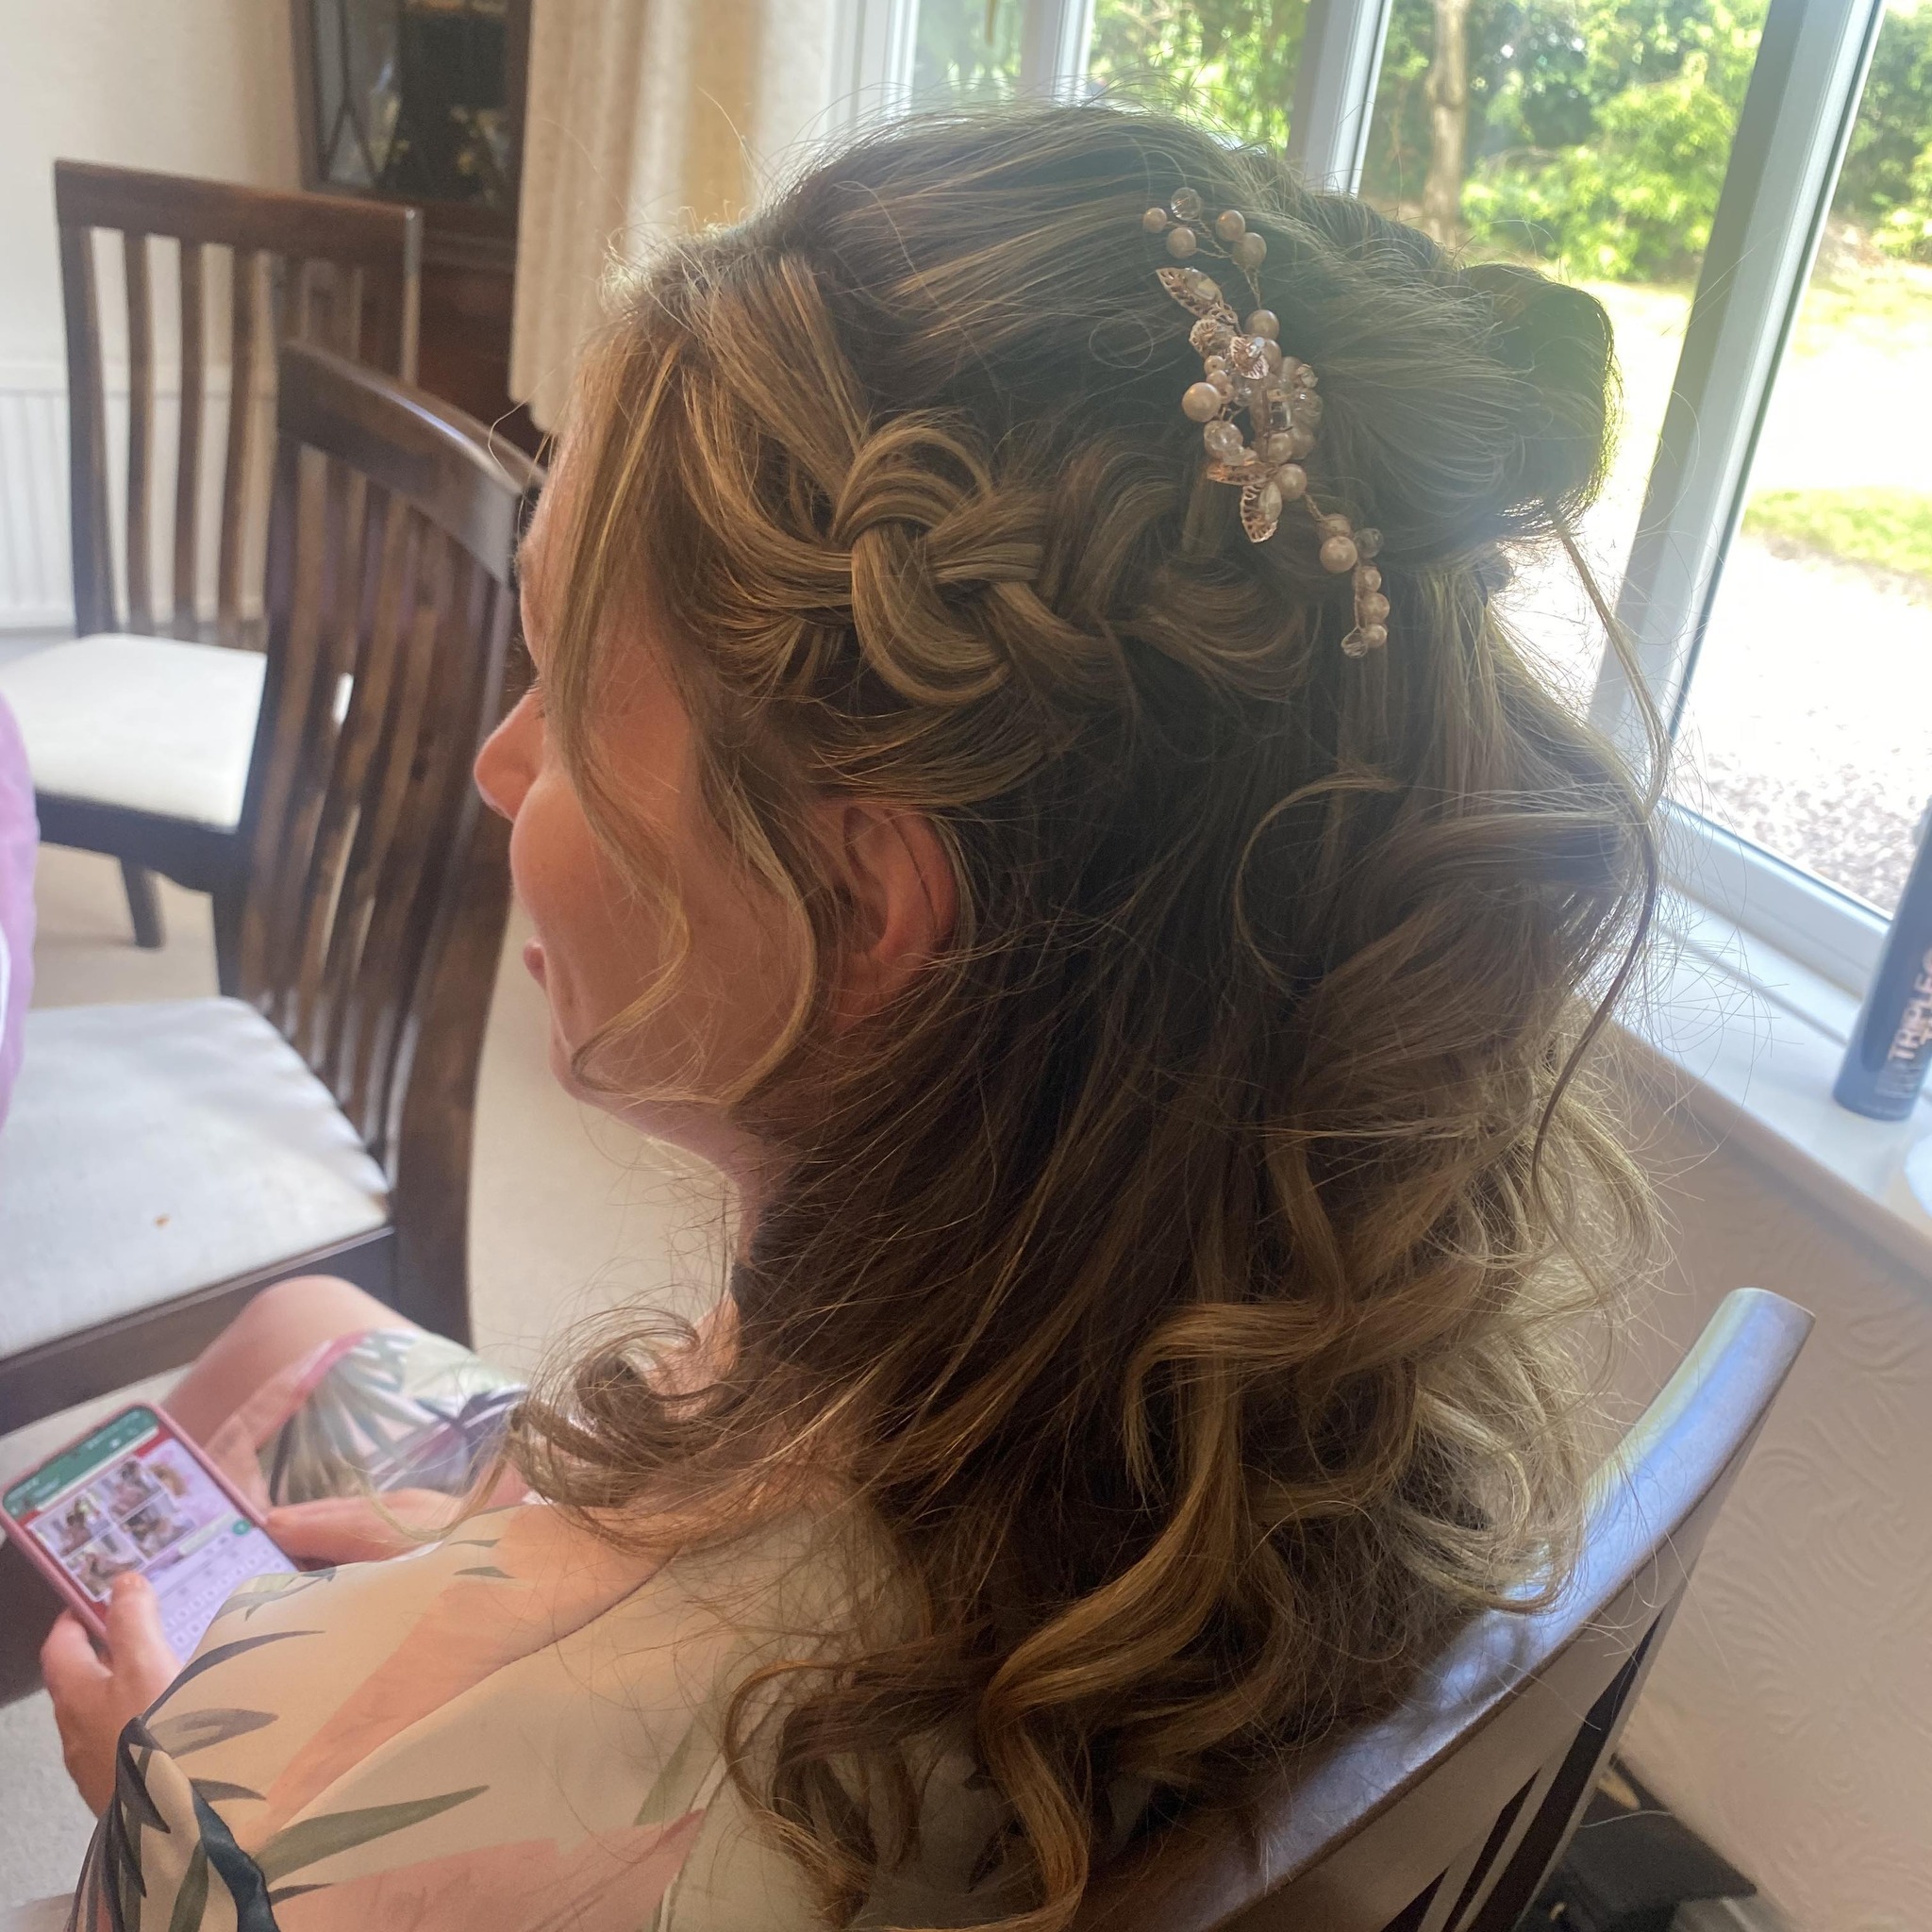 Hair up styles are perfect for any special occasion